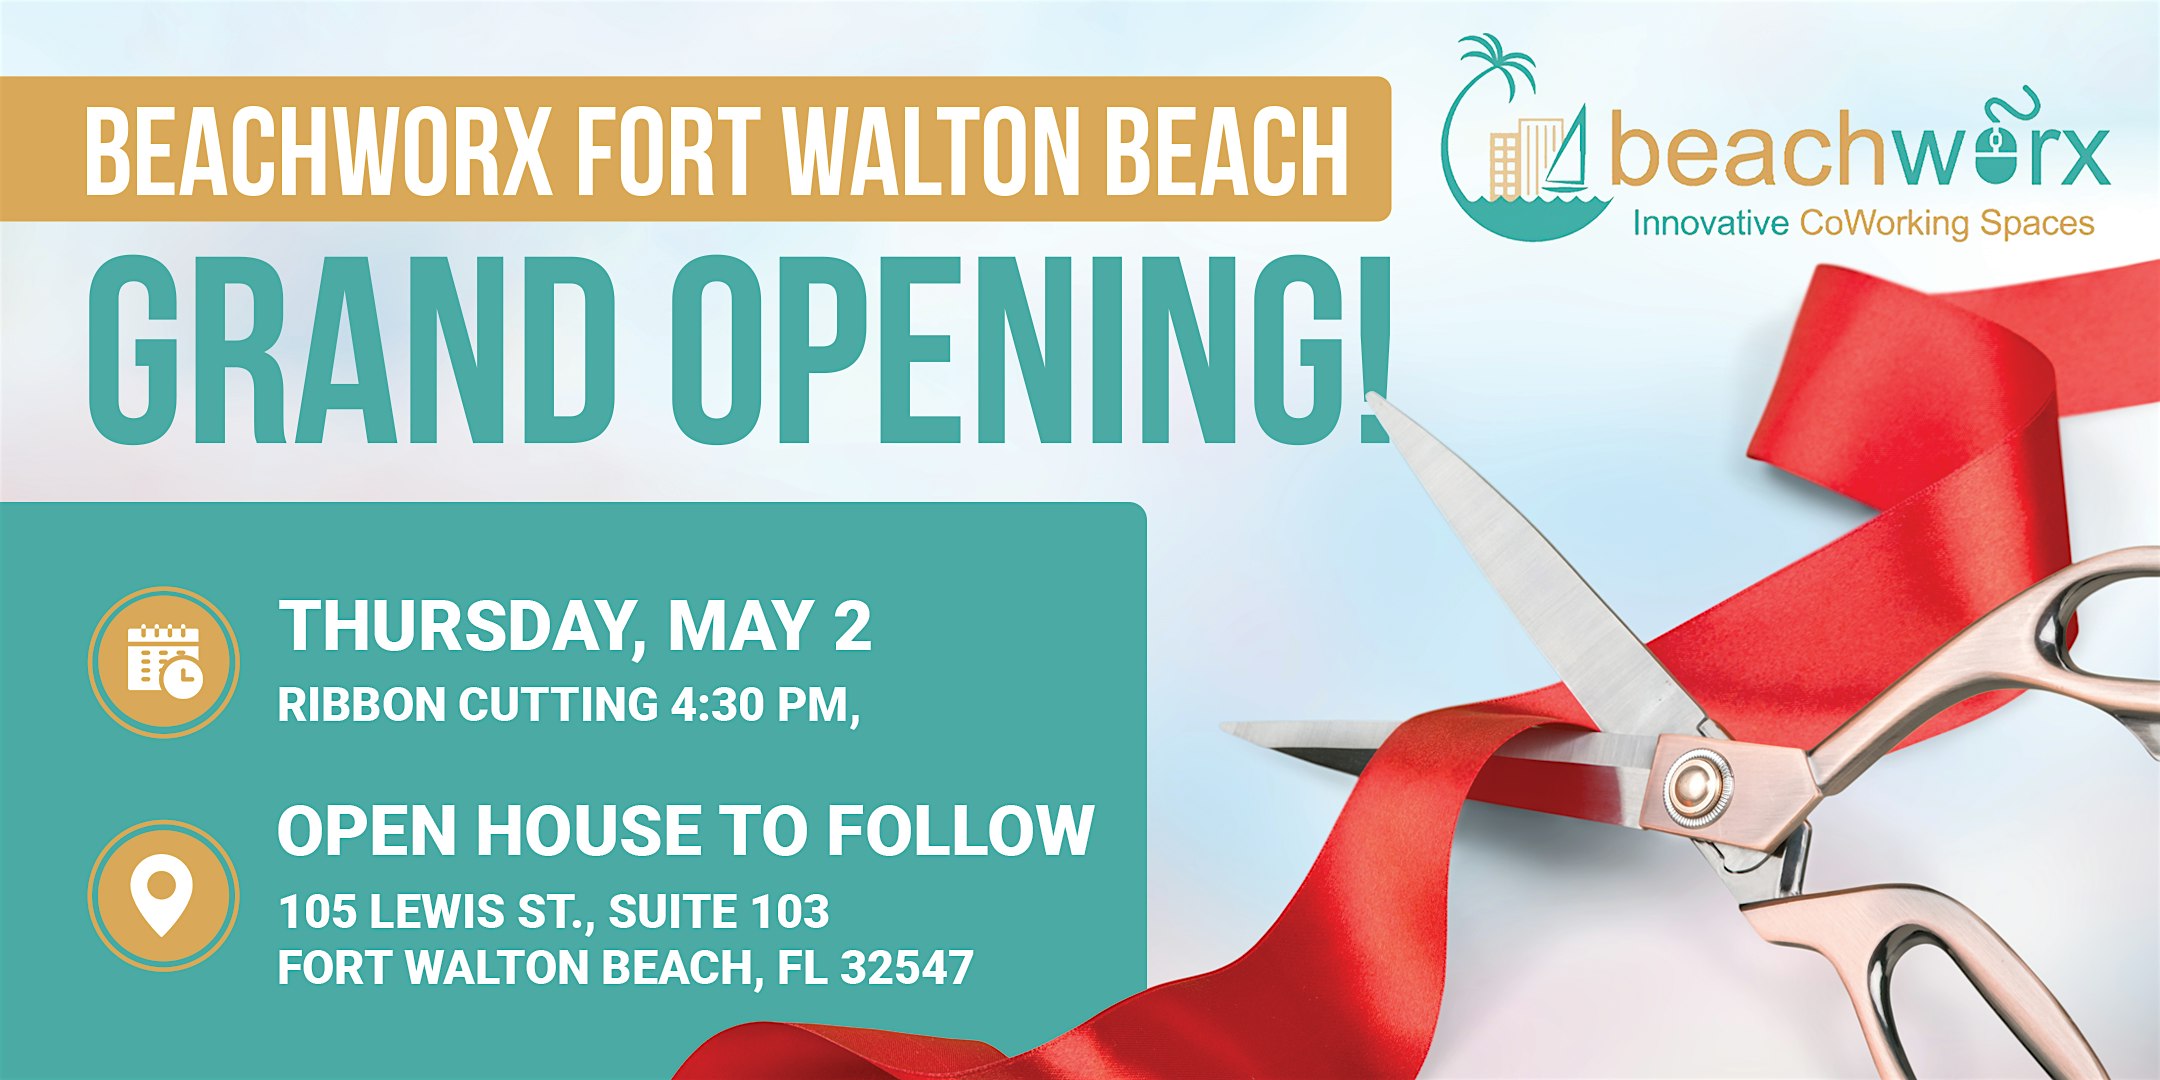 Ribbon Cutting, Open House and Networking at Beachworx Fort Walton Beach